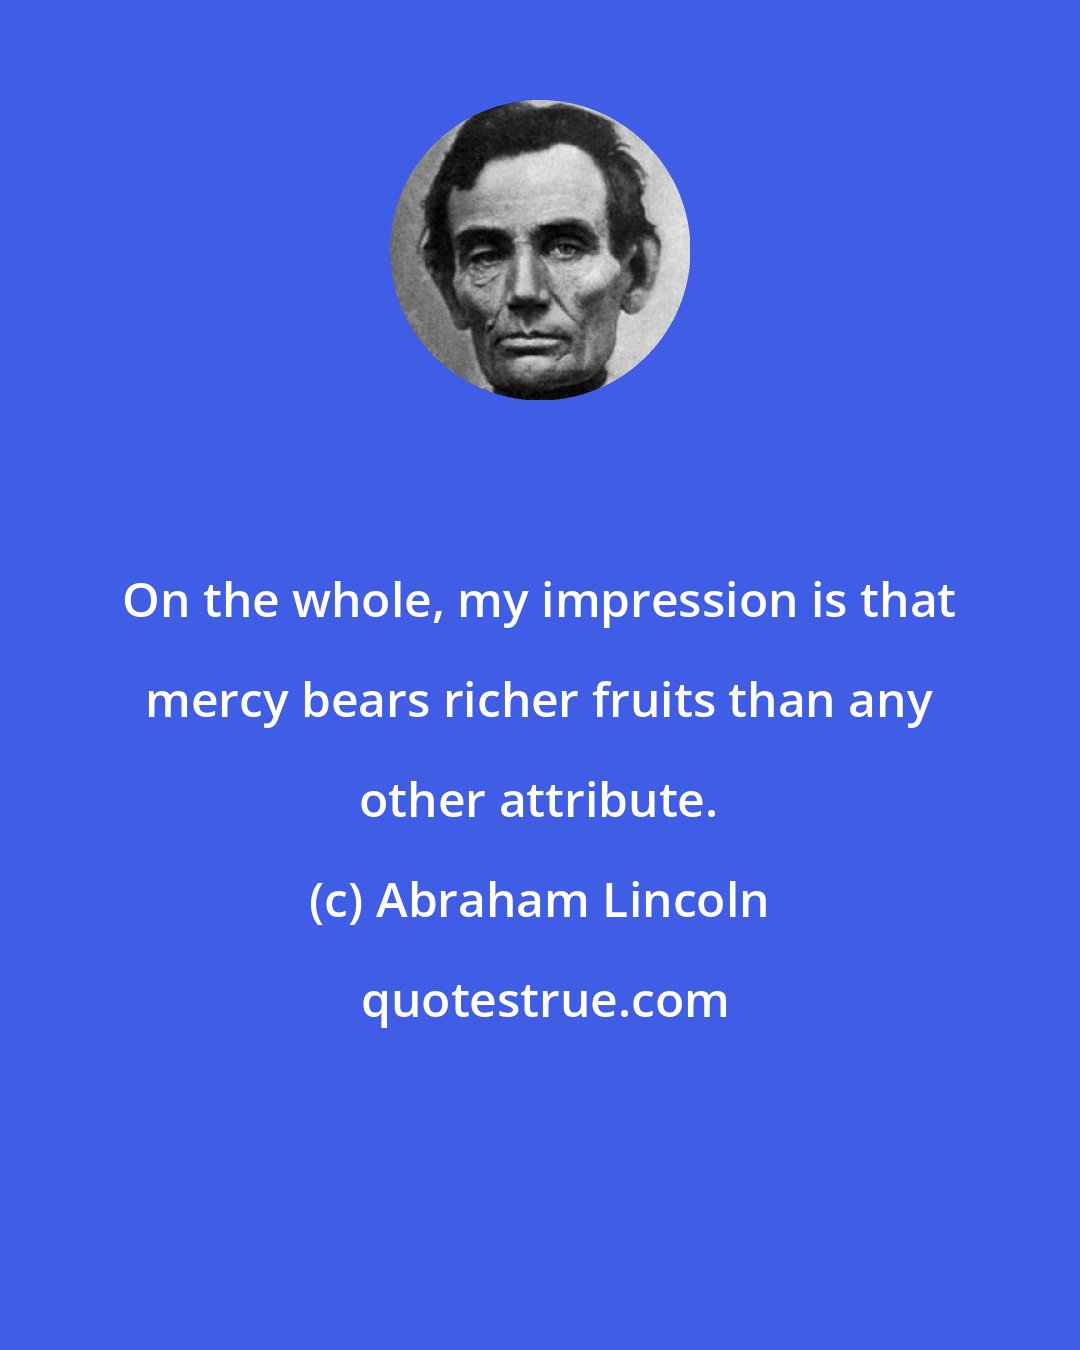 Abraham Lincoln: On the whole, my impression is that mercy bears richer fruits than any other attribute.